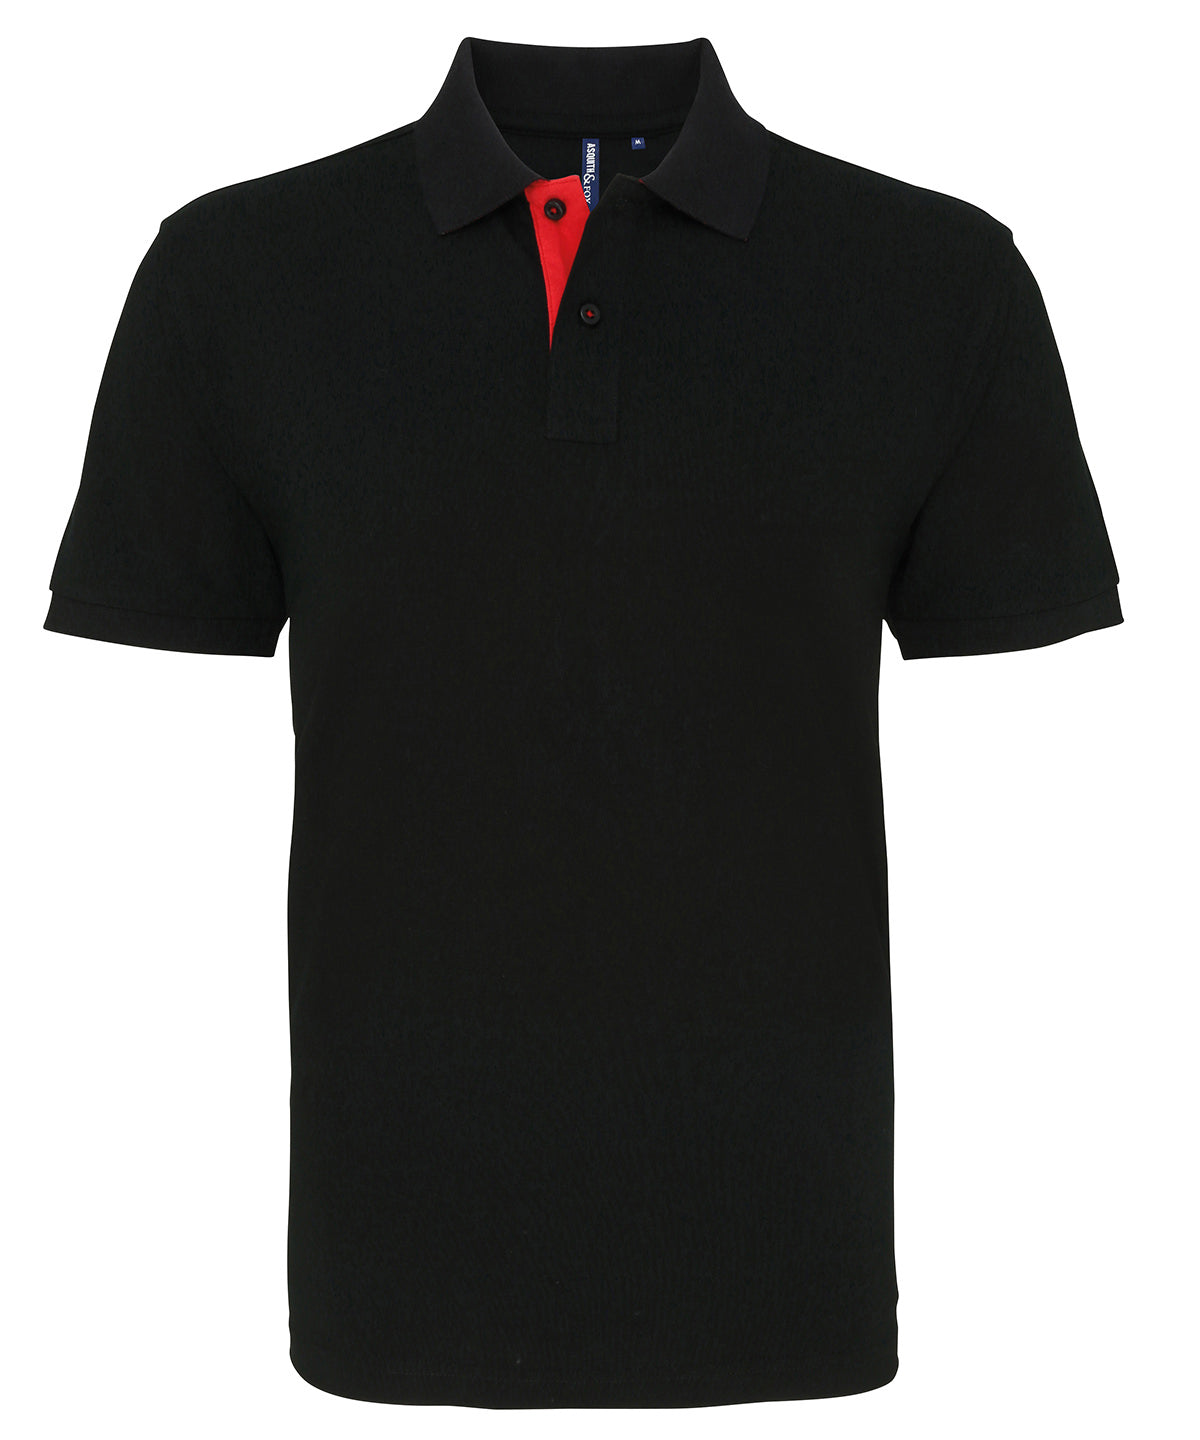 Personalised Polo Shirts - Black Asquith & Fox Men's classic fit contrast polo